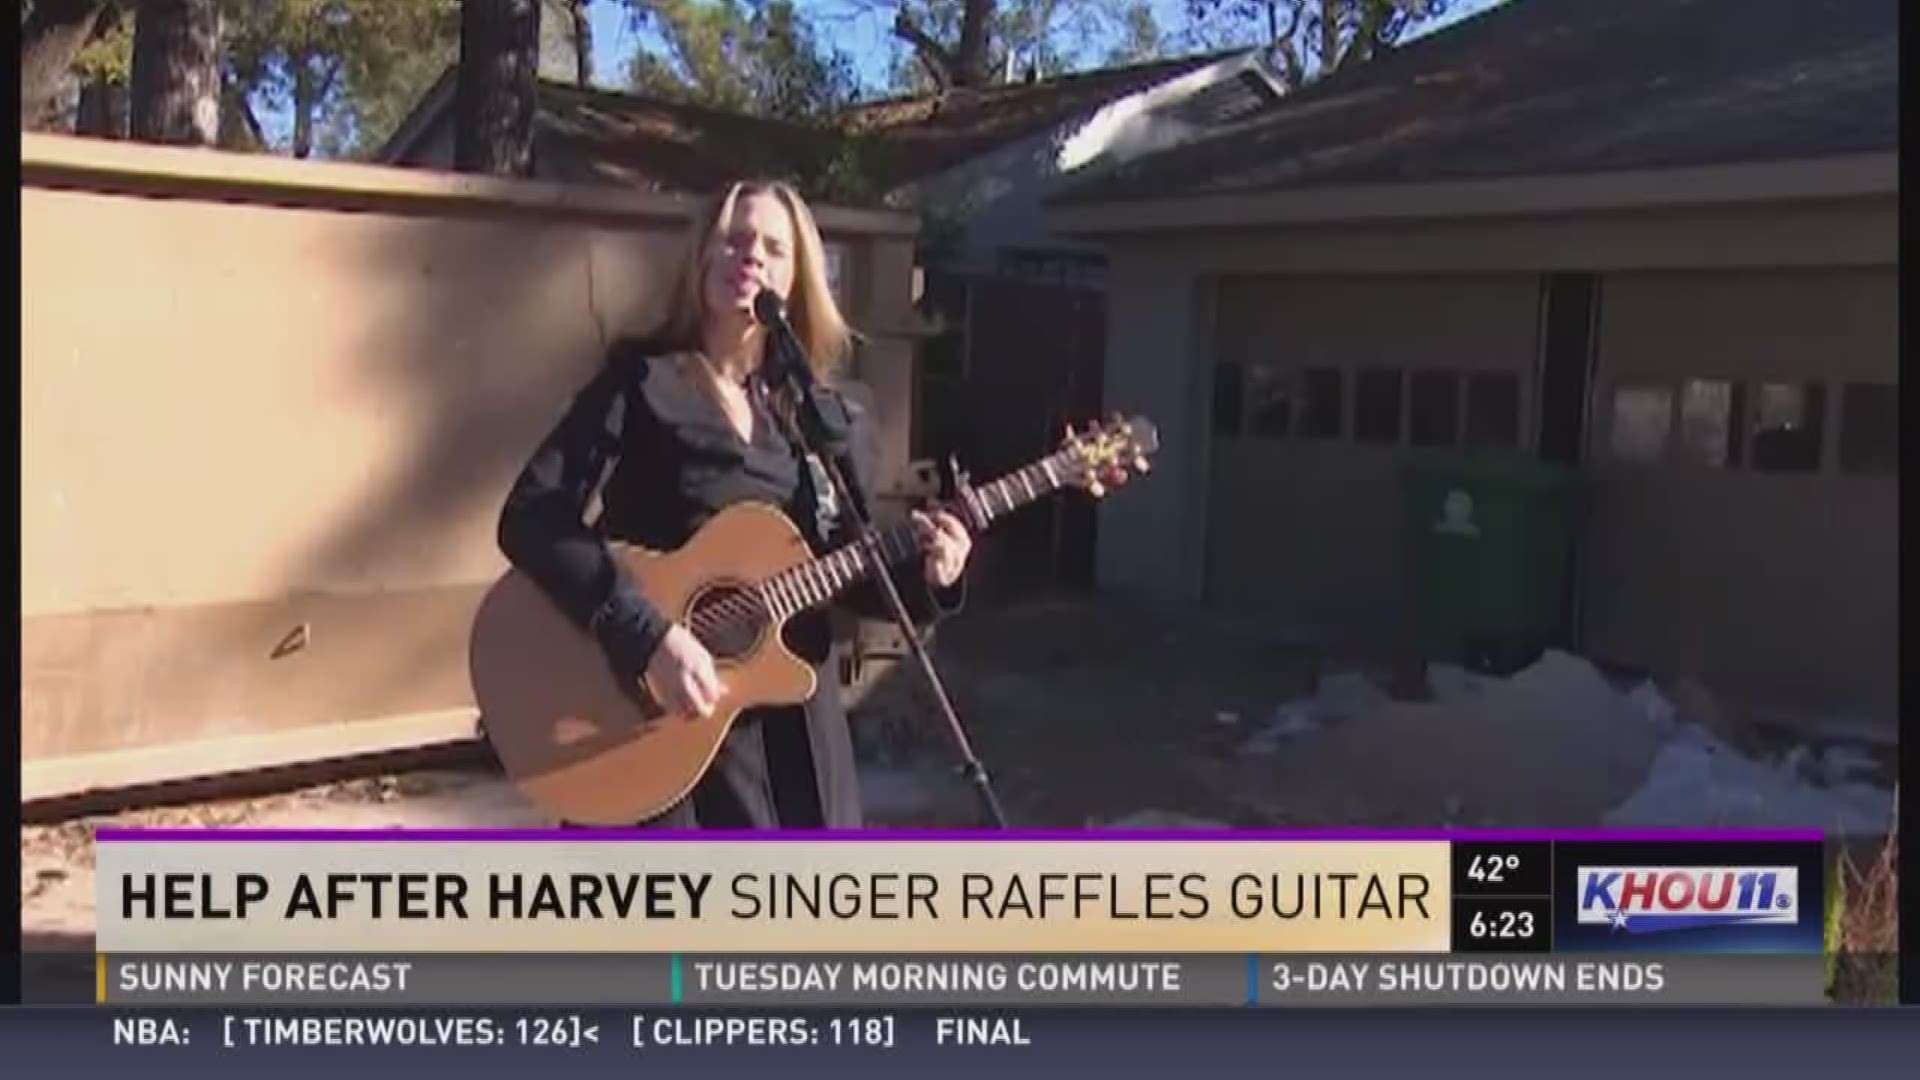 Sherry Williams was live in west Houston to tell us about how a country singer is doing her part in the recovery effort.